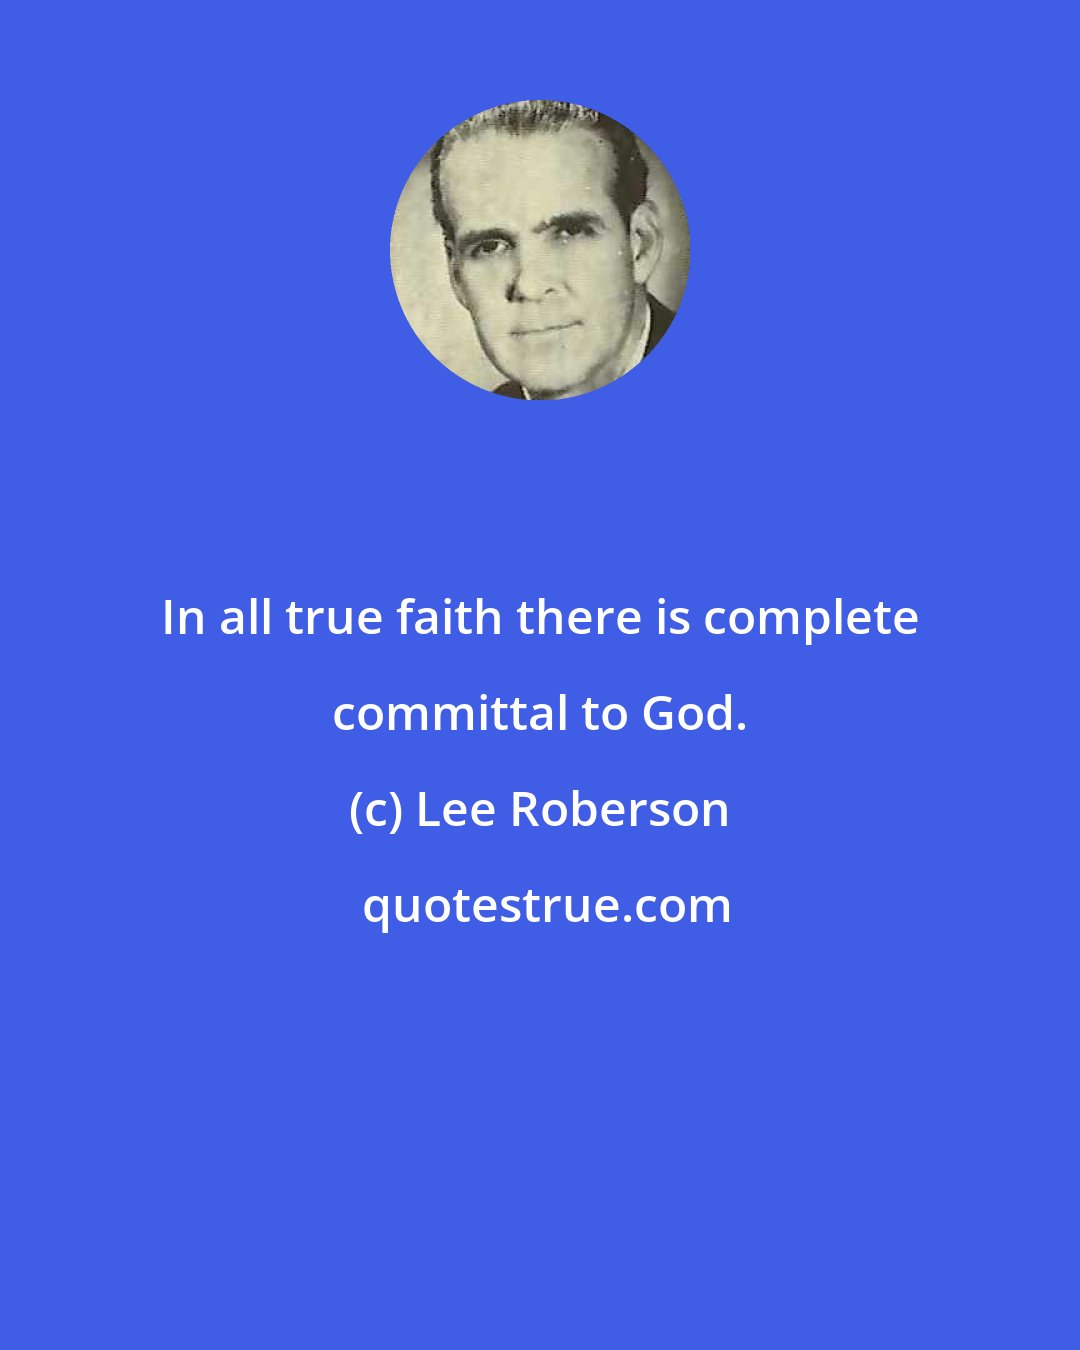 Lee Roberson: In all true faith there is complete committal to God.